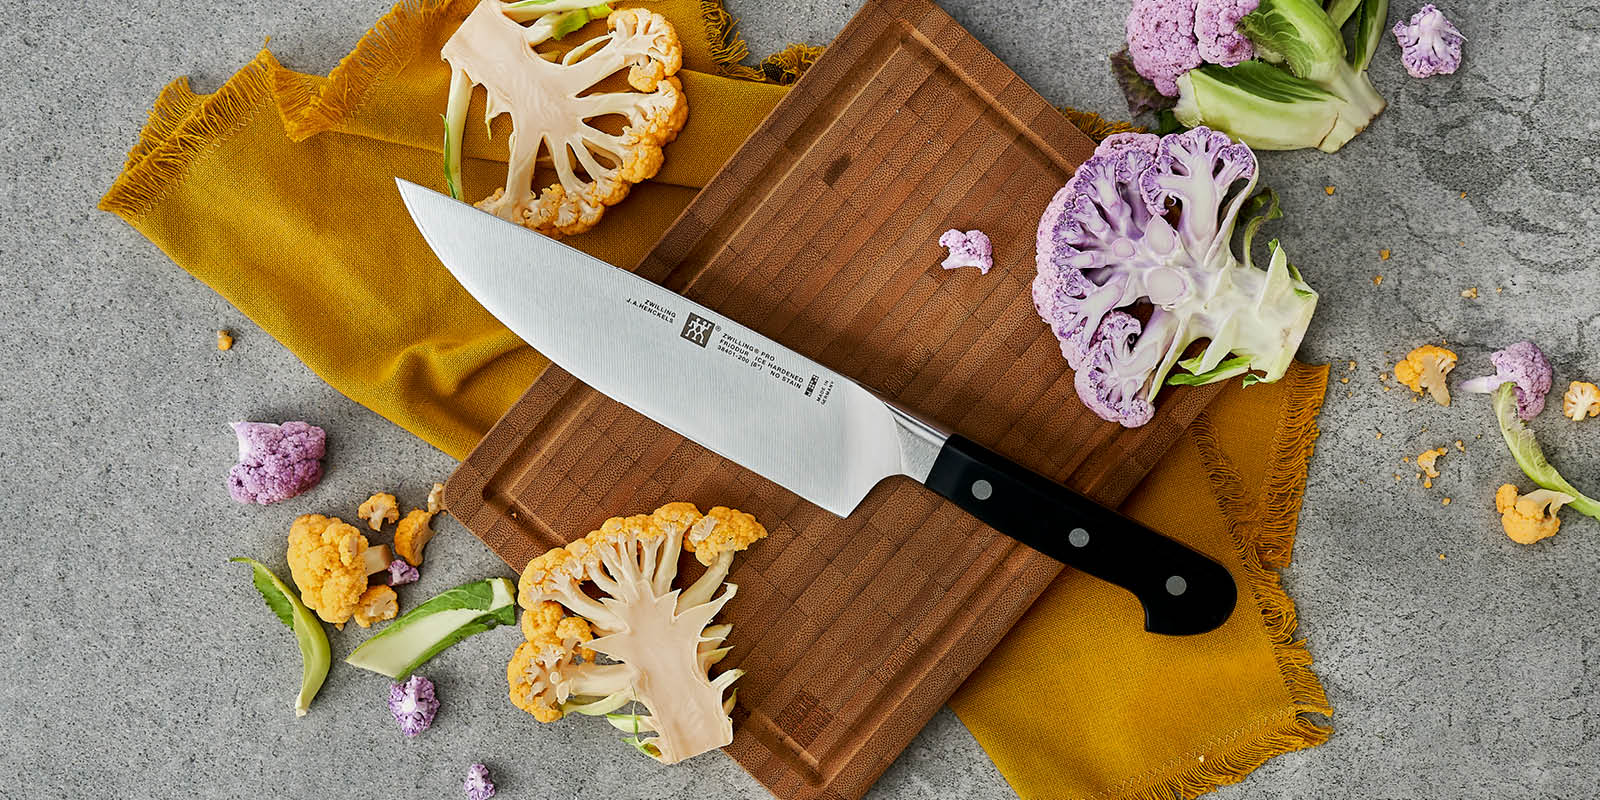 https://www.zwilling.com/on/demandware.static/-/Sites-zwilling-us-Library/default/dw2105face/images/product-content/masonry-content/zwilling/cutlery/pro/38401-201-0_Lifestyle_Image_Series_OS_1200x600.jpg